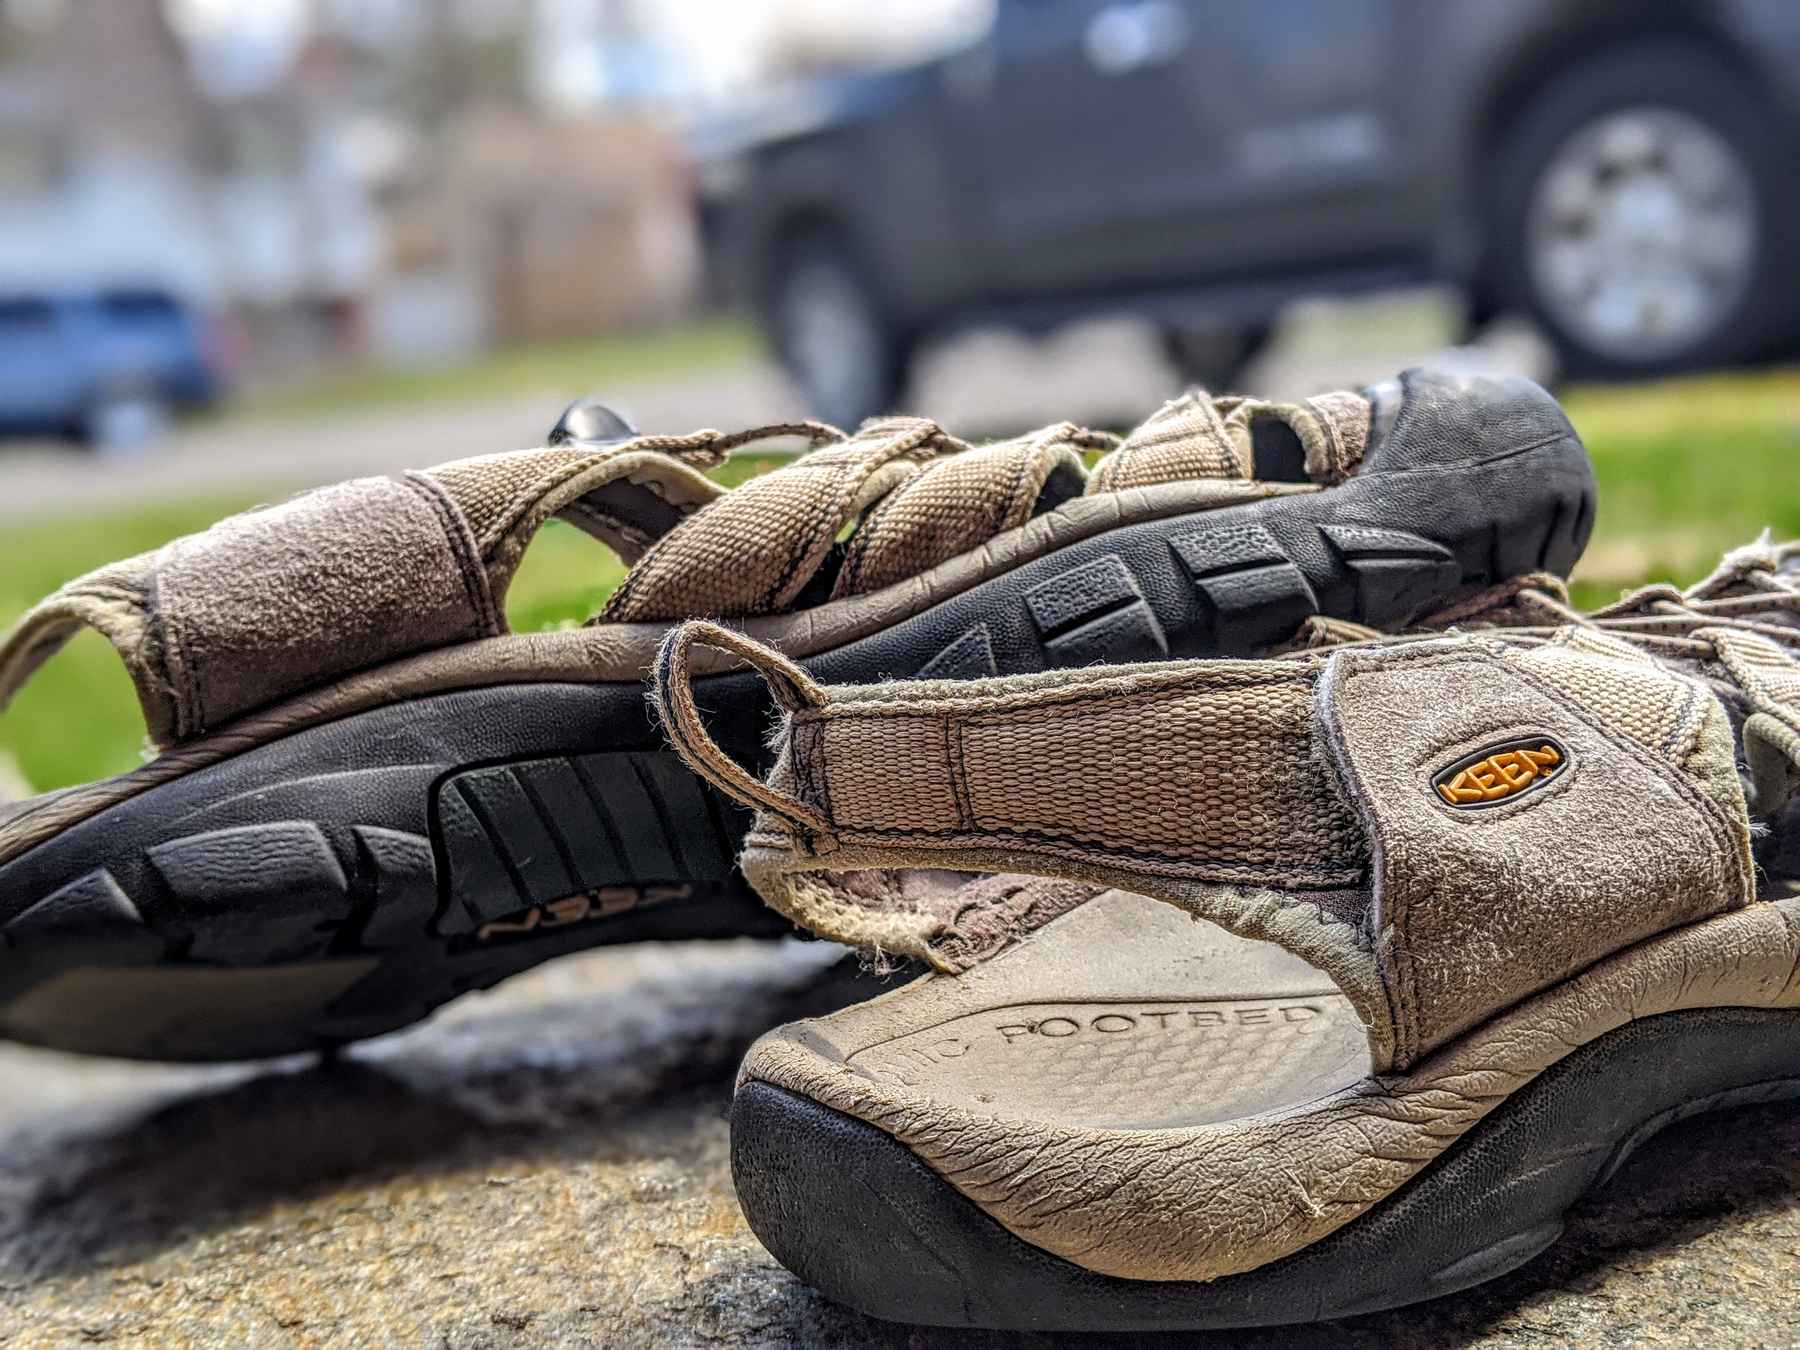 Review: Keen Newport sandals—Ugly, but 